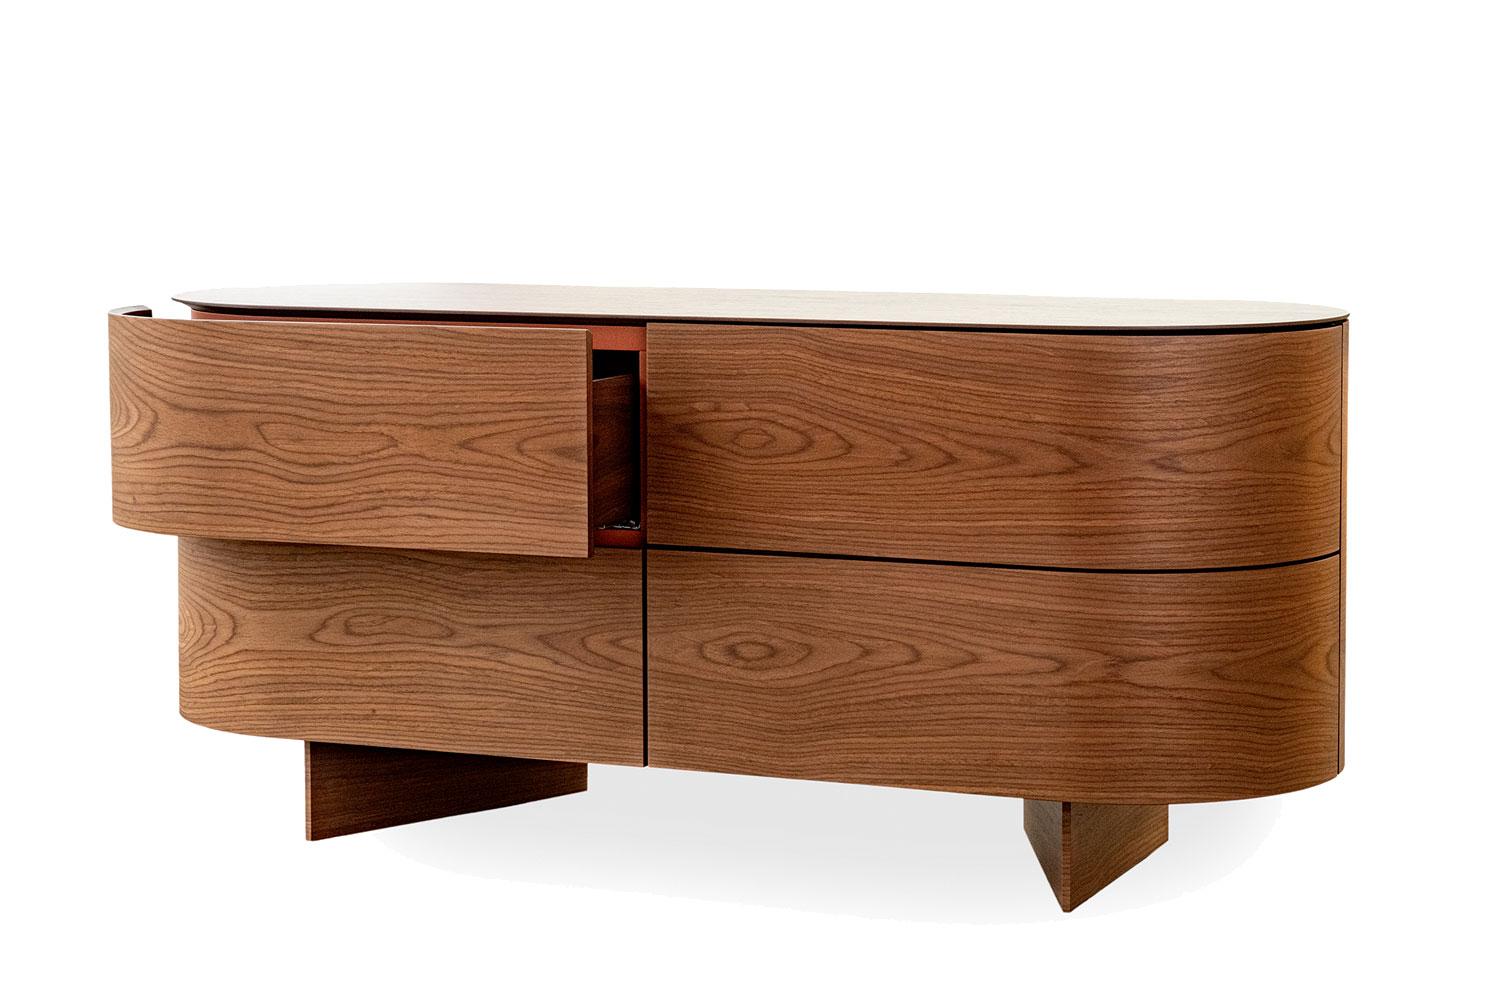 Rondos Cabinet By Cassina.

Rondos 558 01 is a four drawer credenza, dresser, entryway piece in finished in American Walnut with a wood top.

Designed by Patricia Urquiola, Rondos is a design chest of drawers with soft, rounded contours that